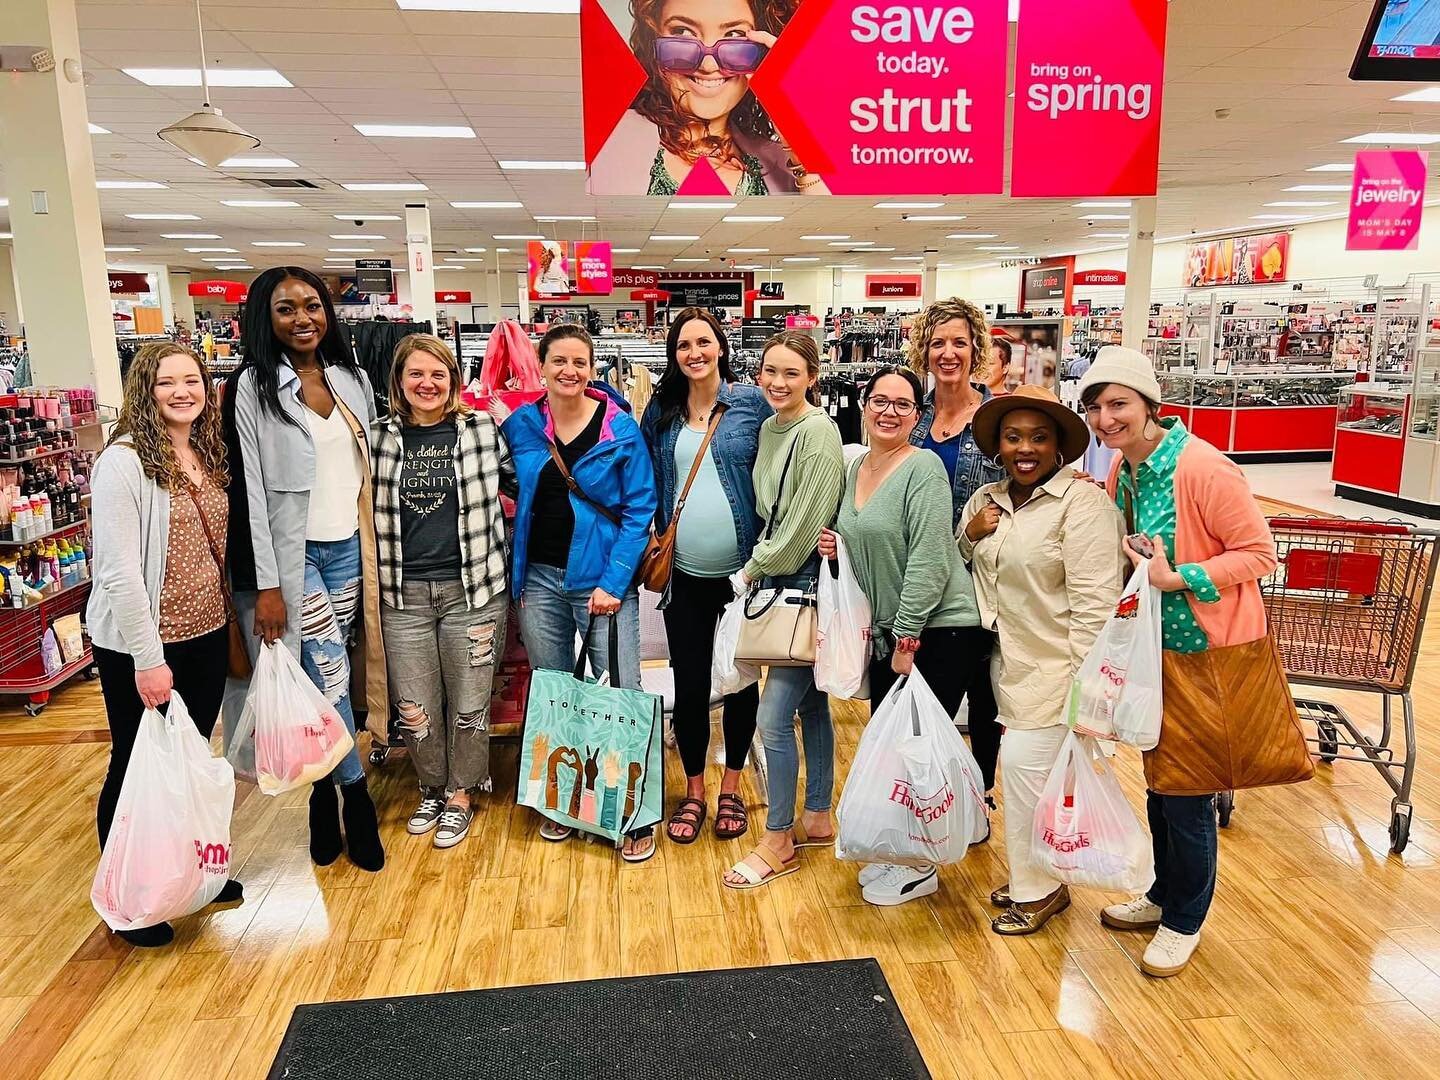 Today One family church ladies enjoyed an amazing evening out! They celebrated Ashley Bragg the mom to be, and enjoyed some dinner and shopping! #churchplanting #womensgathering